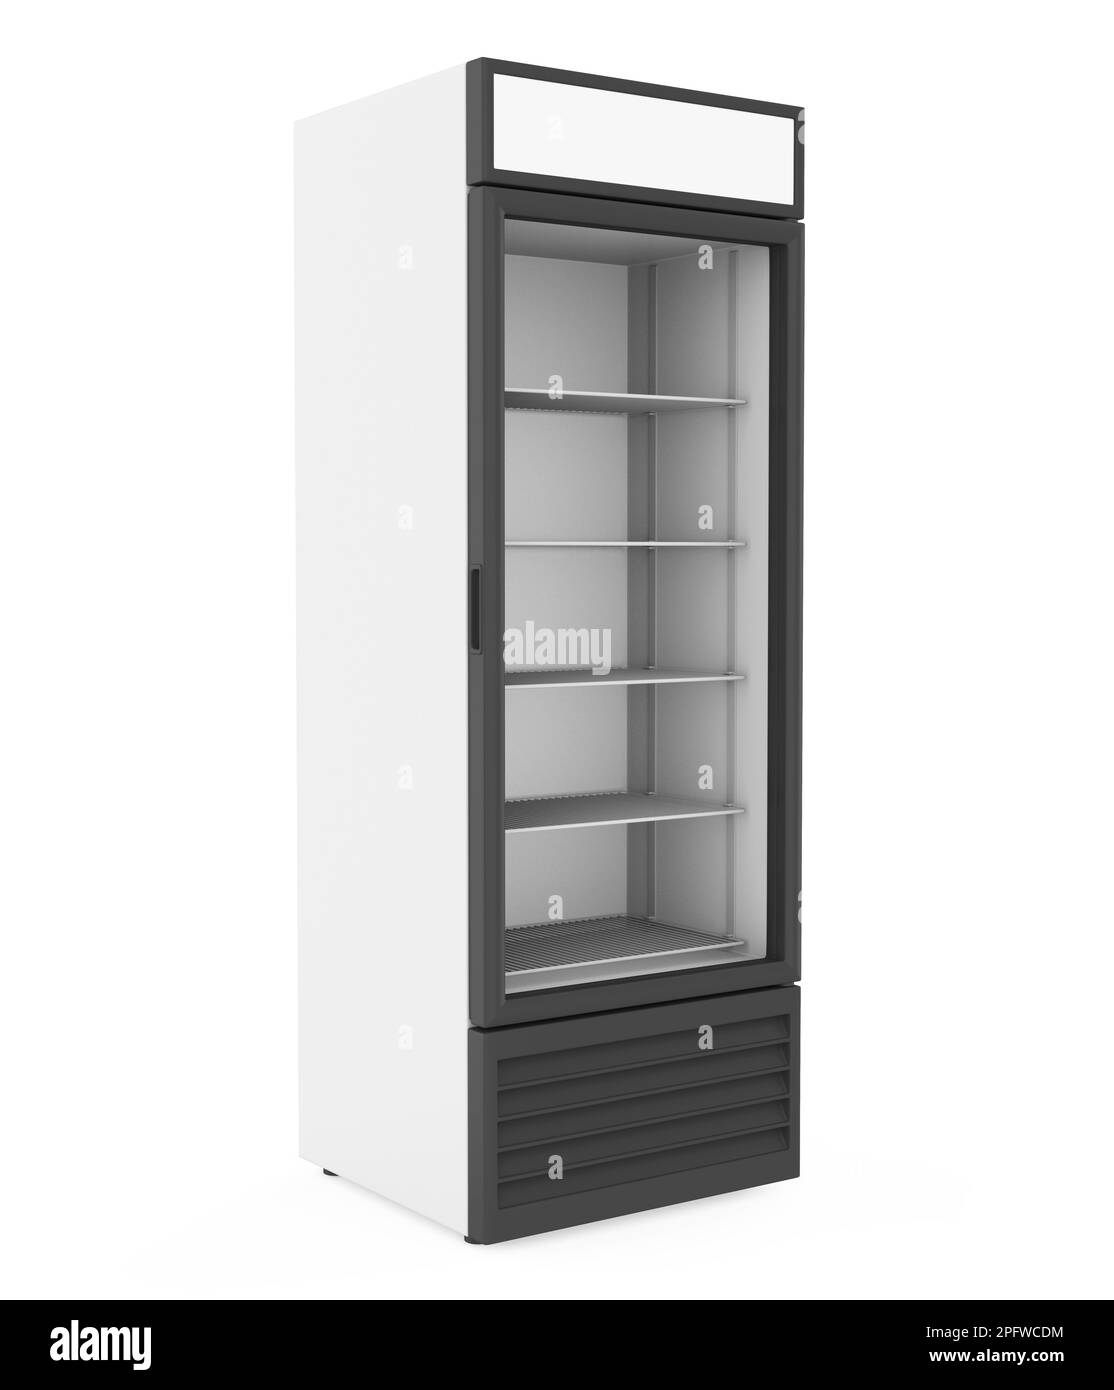 Commercial Display Refrigerator Isolated Stock Photo